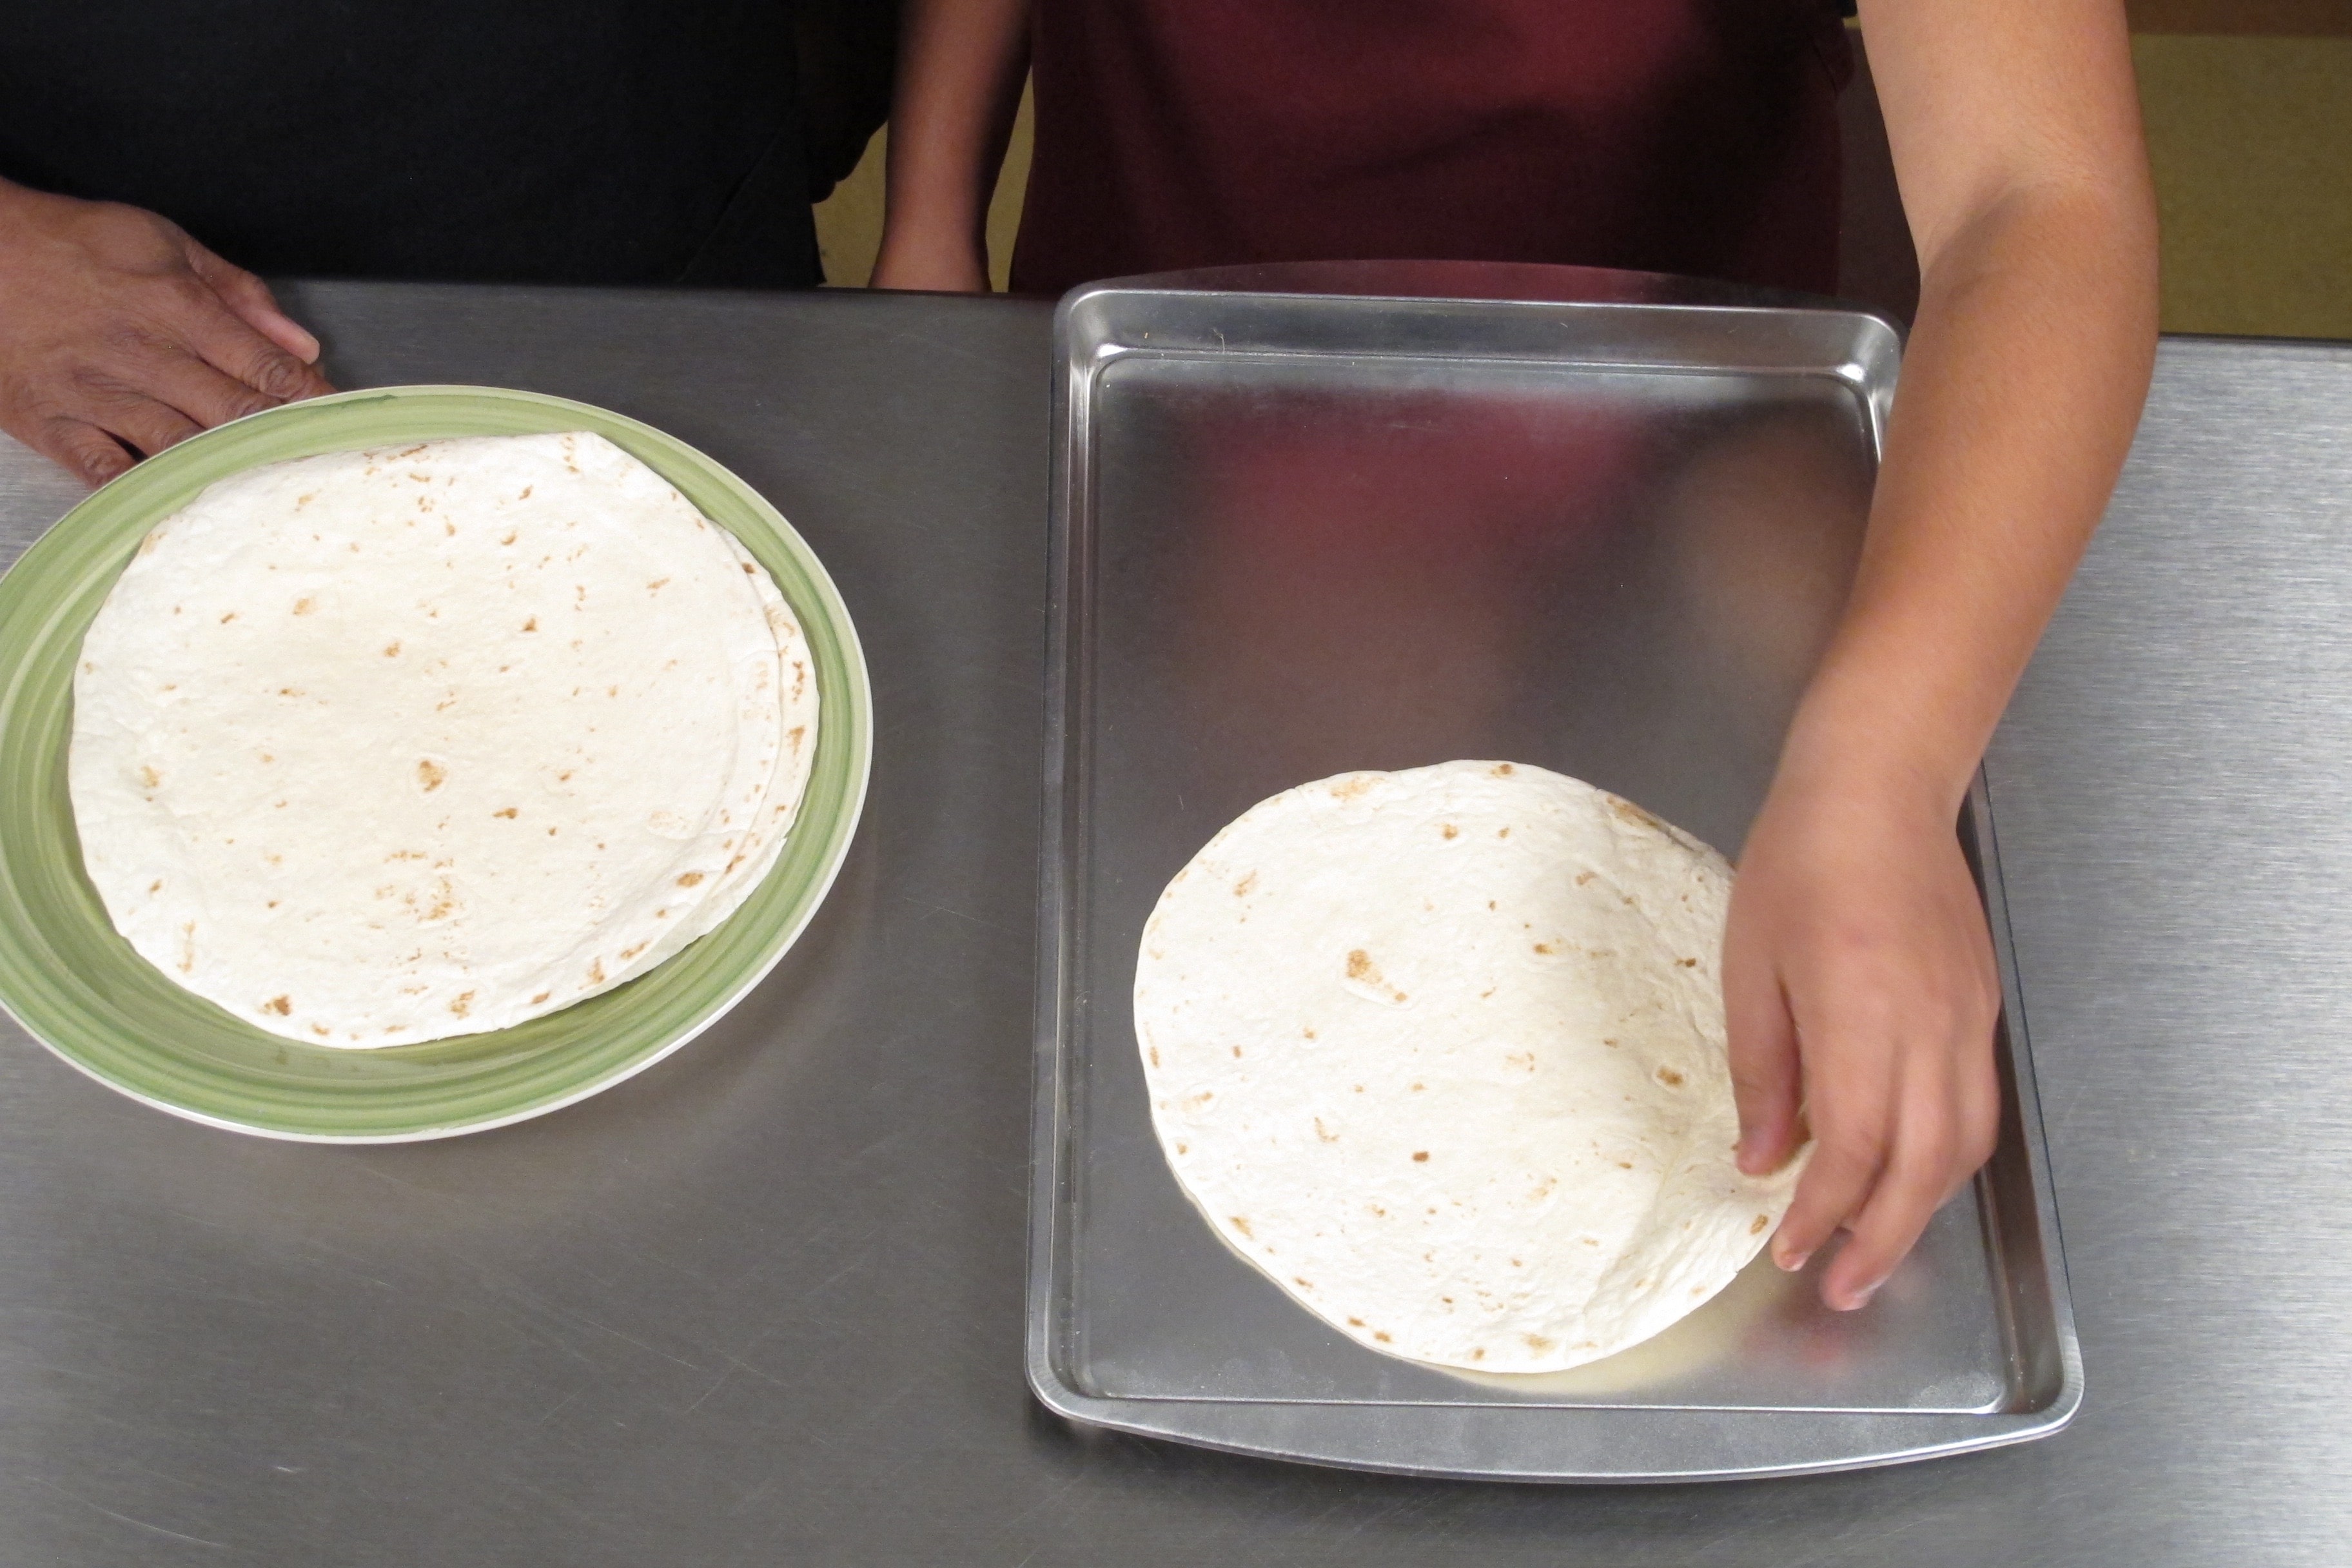 Place tortillas on two large baking sheets. Cook for 5 minutes and flip. Cook for 5 more minutes. Put to the side.